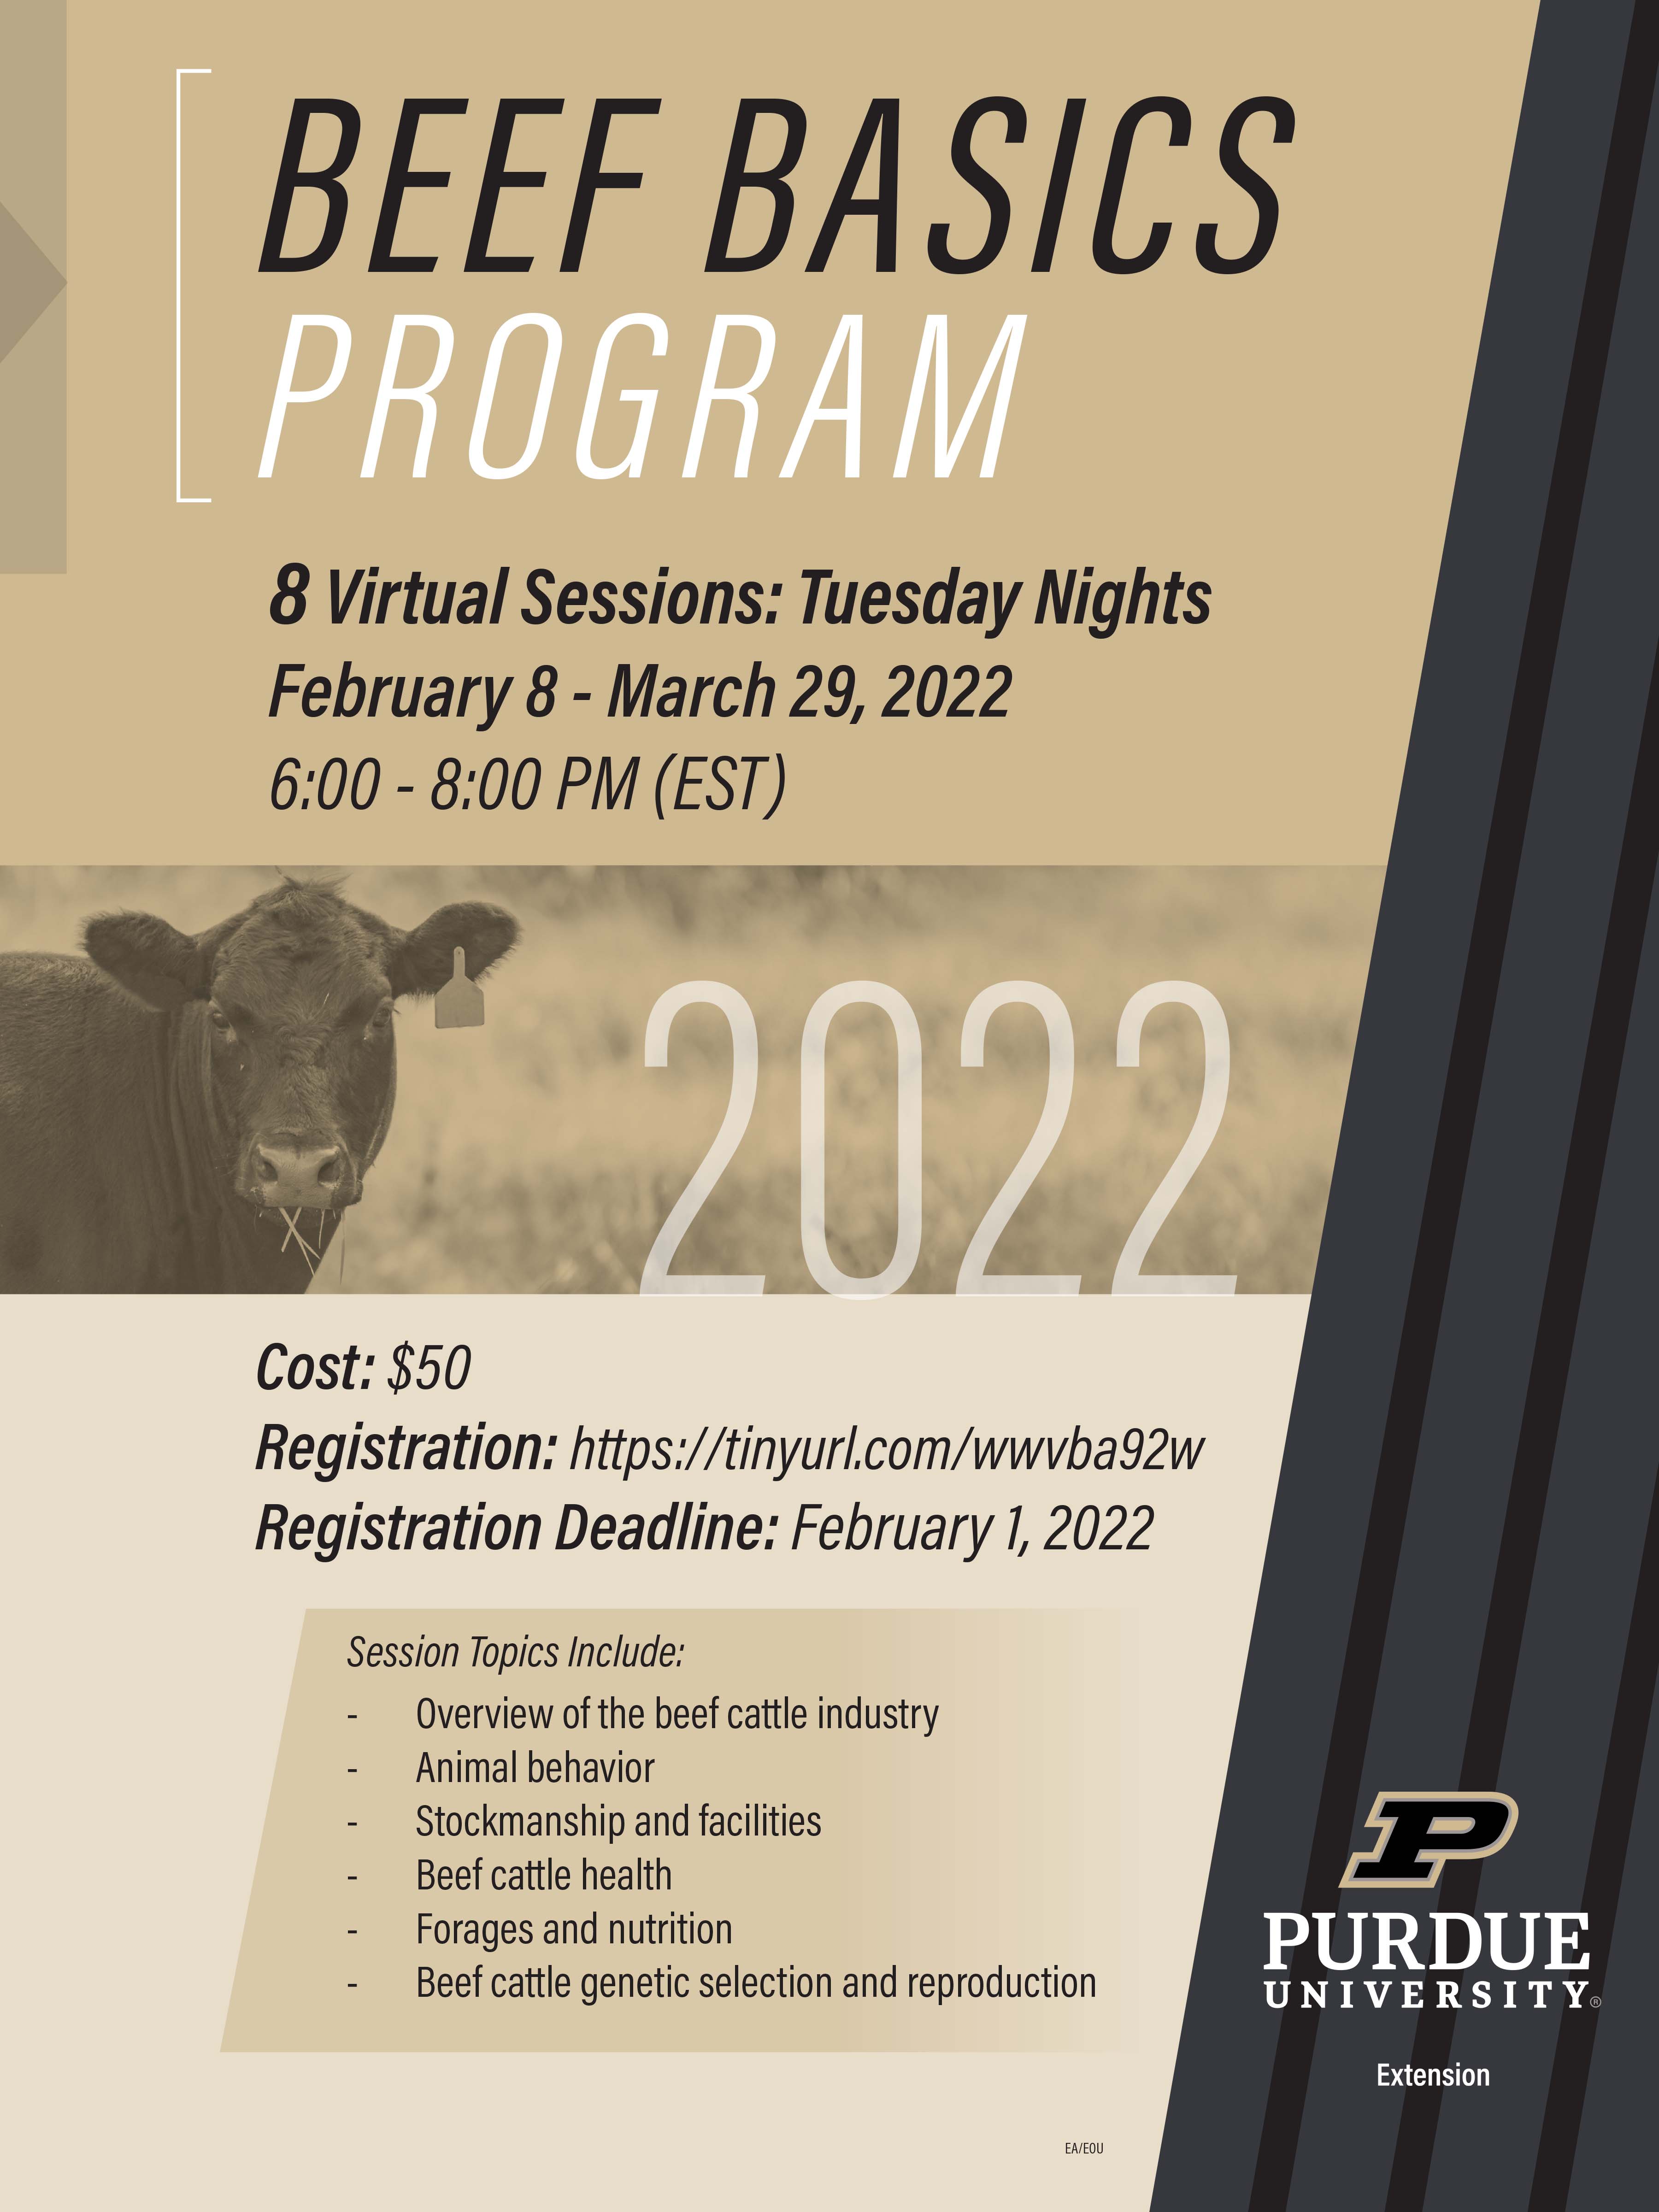  Purdue Extension beef experts invite producers with fewer than five years of experience and individuals who are considering starting a beef cattle operation to join them for Purdue Beef Basics. The virtual program is scheduled for 6-8 p.m. ET Tuesday evenings starting Feb. 8 and ending March 29.